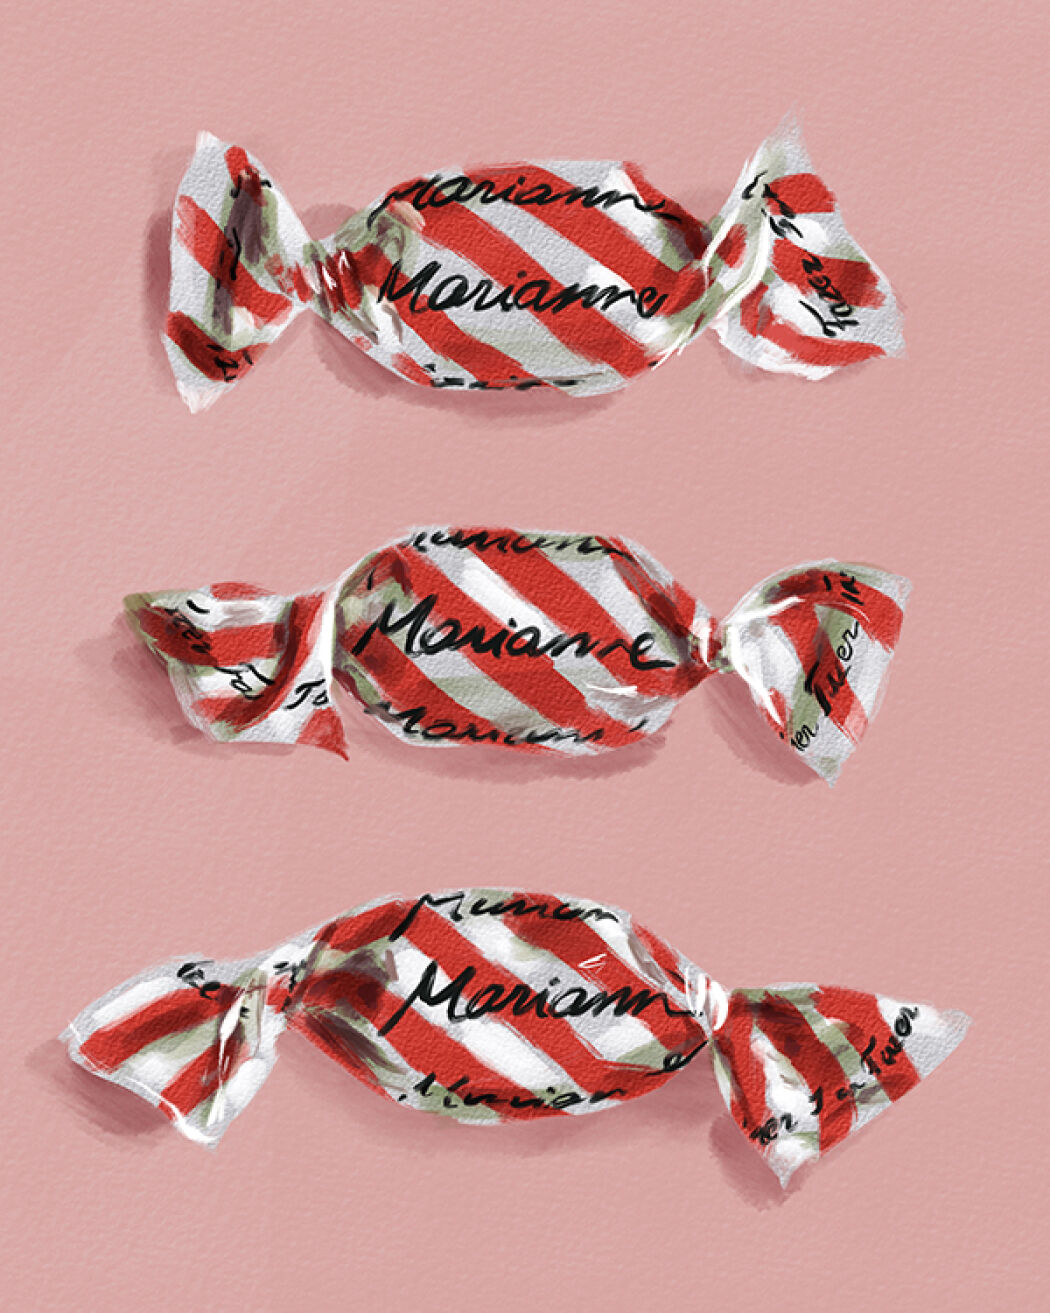 Candy Packaging illustration by Christina Gliha